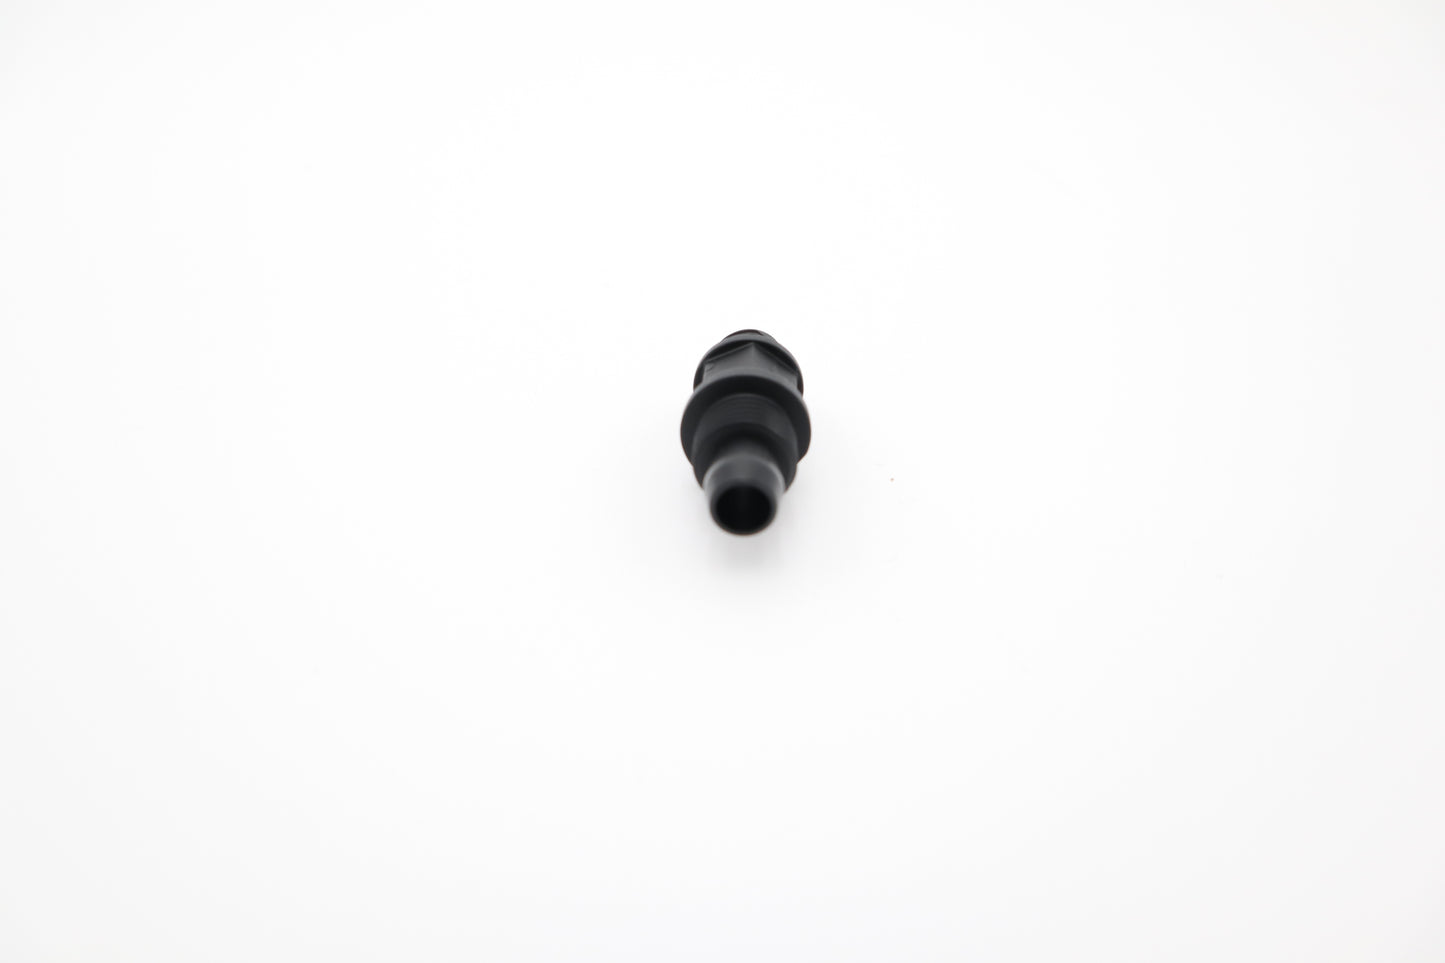 DJI Agras T40 Hose RIght-Angle Connector